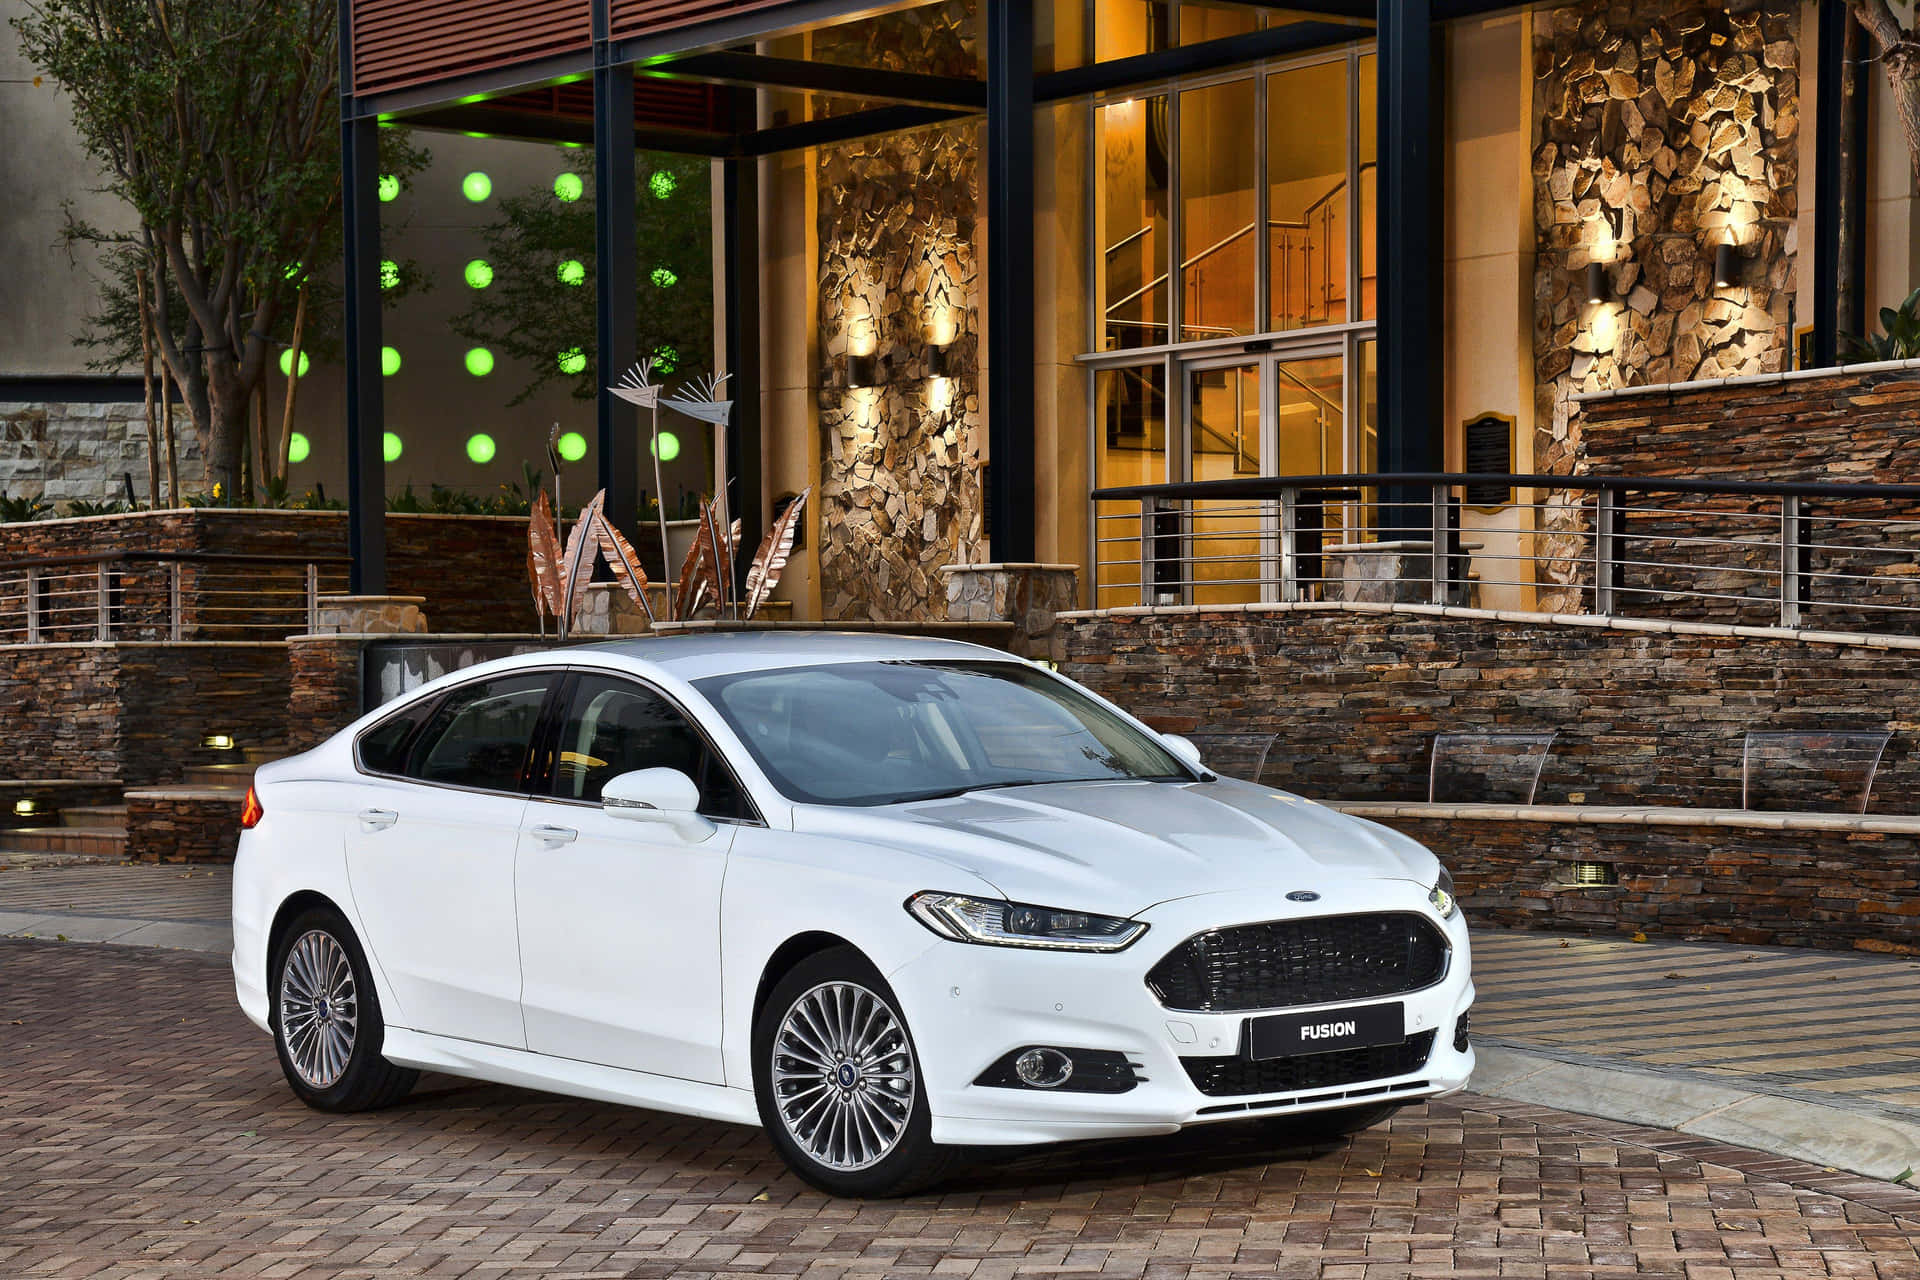 Sleek and Stylish Ford Fusion on the Road Wallpaper